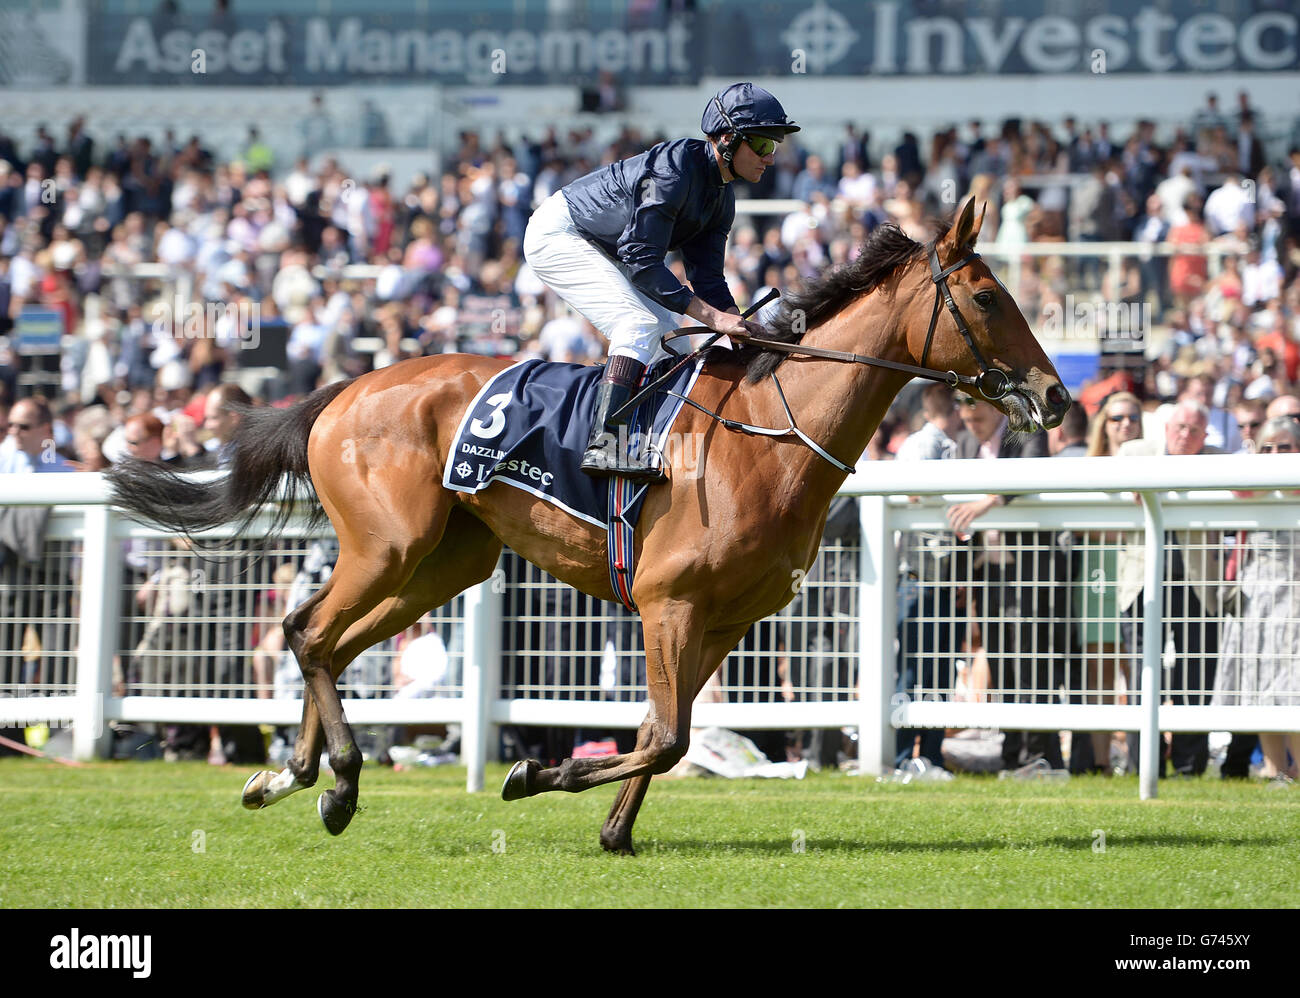 Dazzling ridden by jockey Seamie Heffernan before the Investec Oaks (In Memory Of Sir Henry Cecil) during Investec Ladies Day at Epsom Downs Racecourse, Surrey. Stock Photo